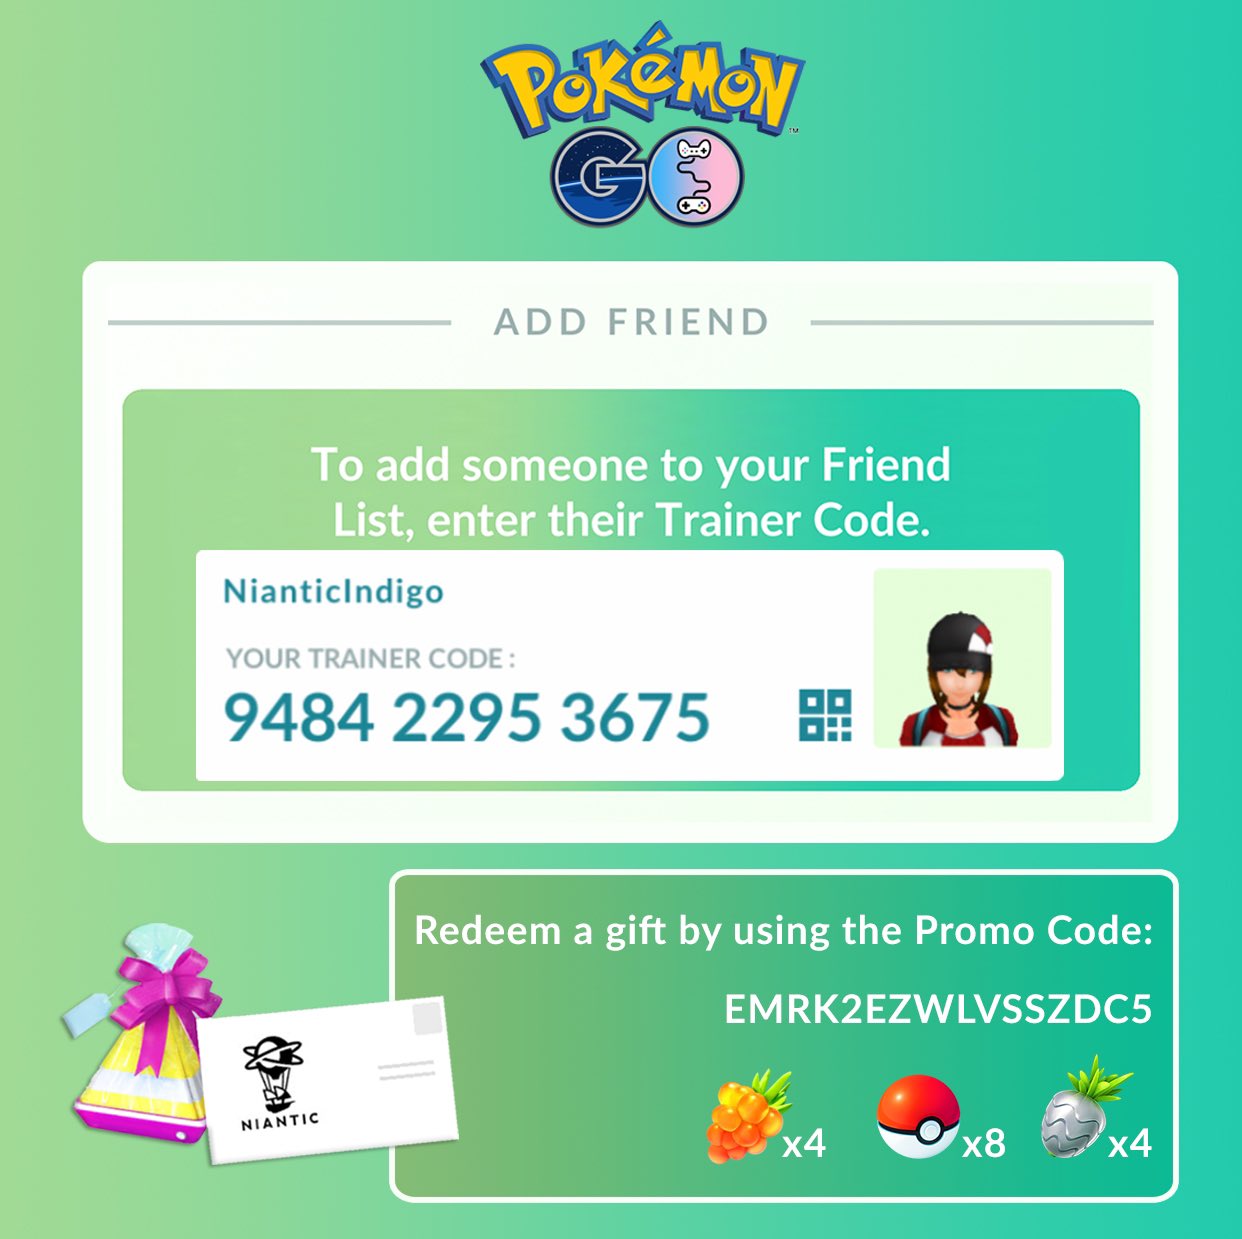 Nintendo Wire on Instagram: The surprises keep coming in Pokémon GO  partnerships this week. While Trainers are focusing on finishing up the  Season of Alola, Niantic has been focusing on building a